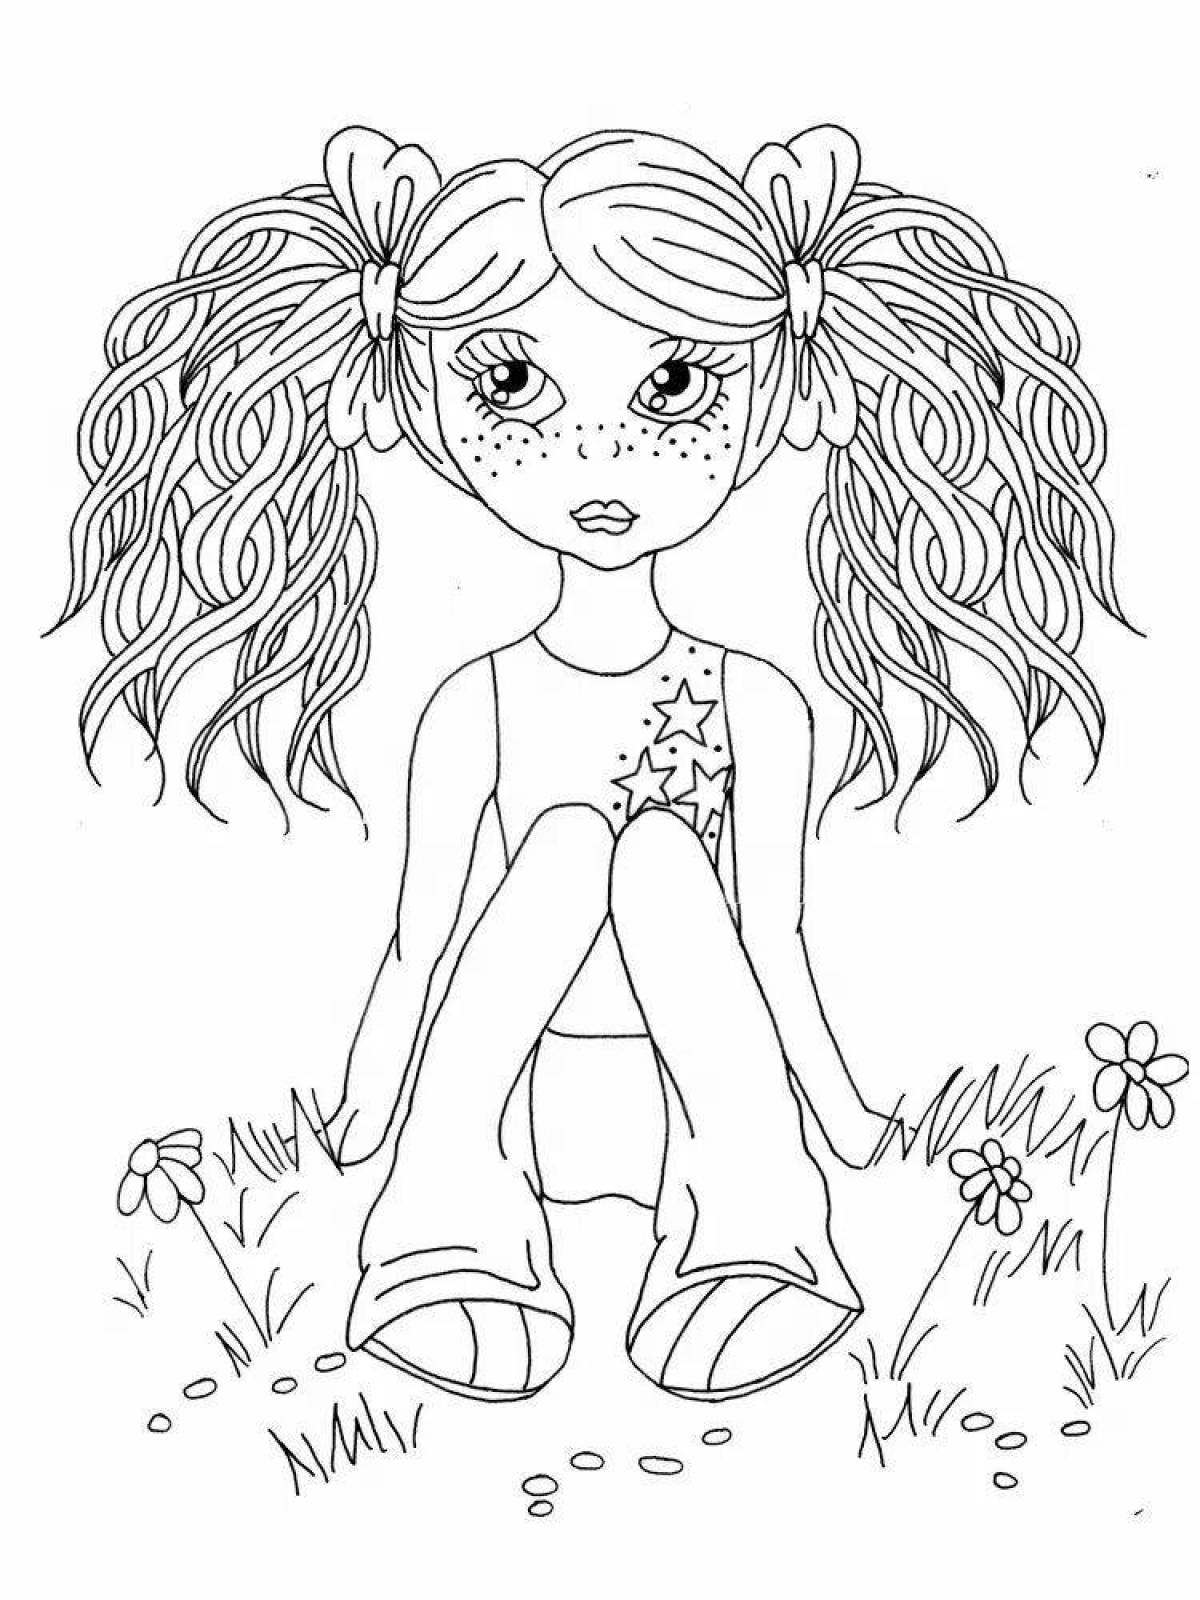 Sparkly coloring girl with pigtails